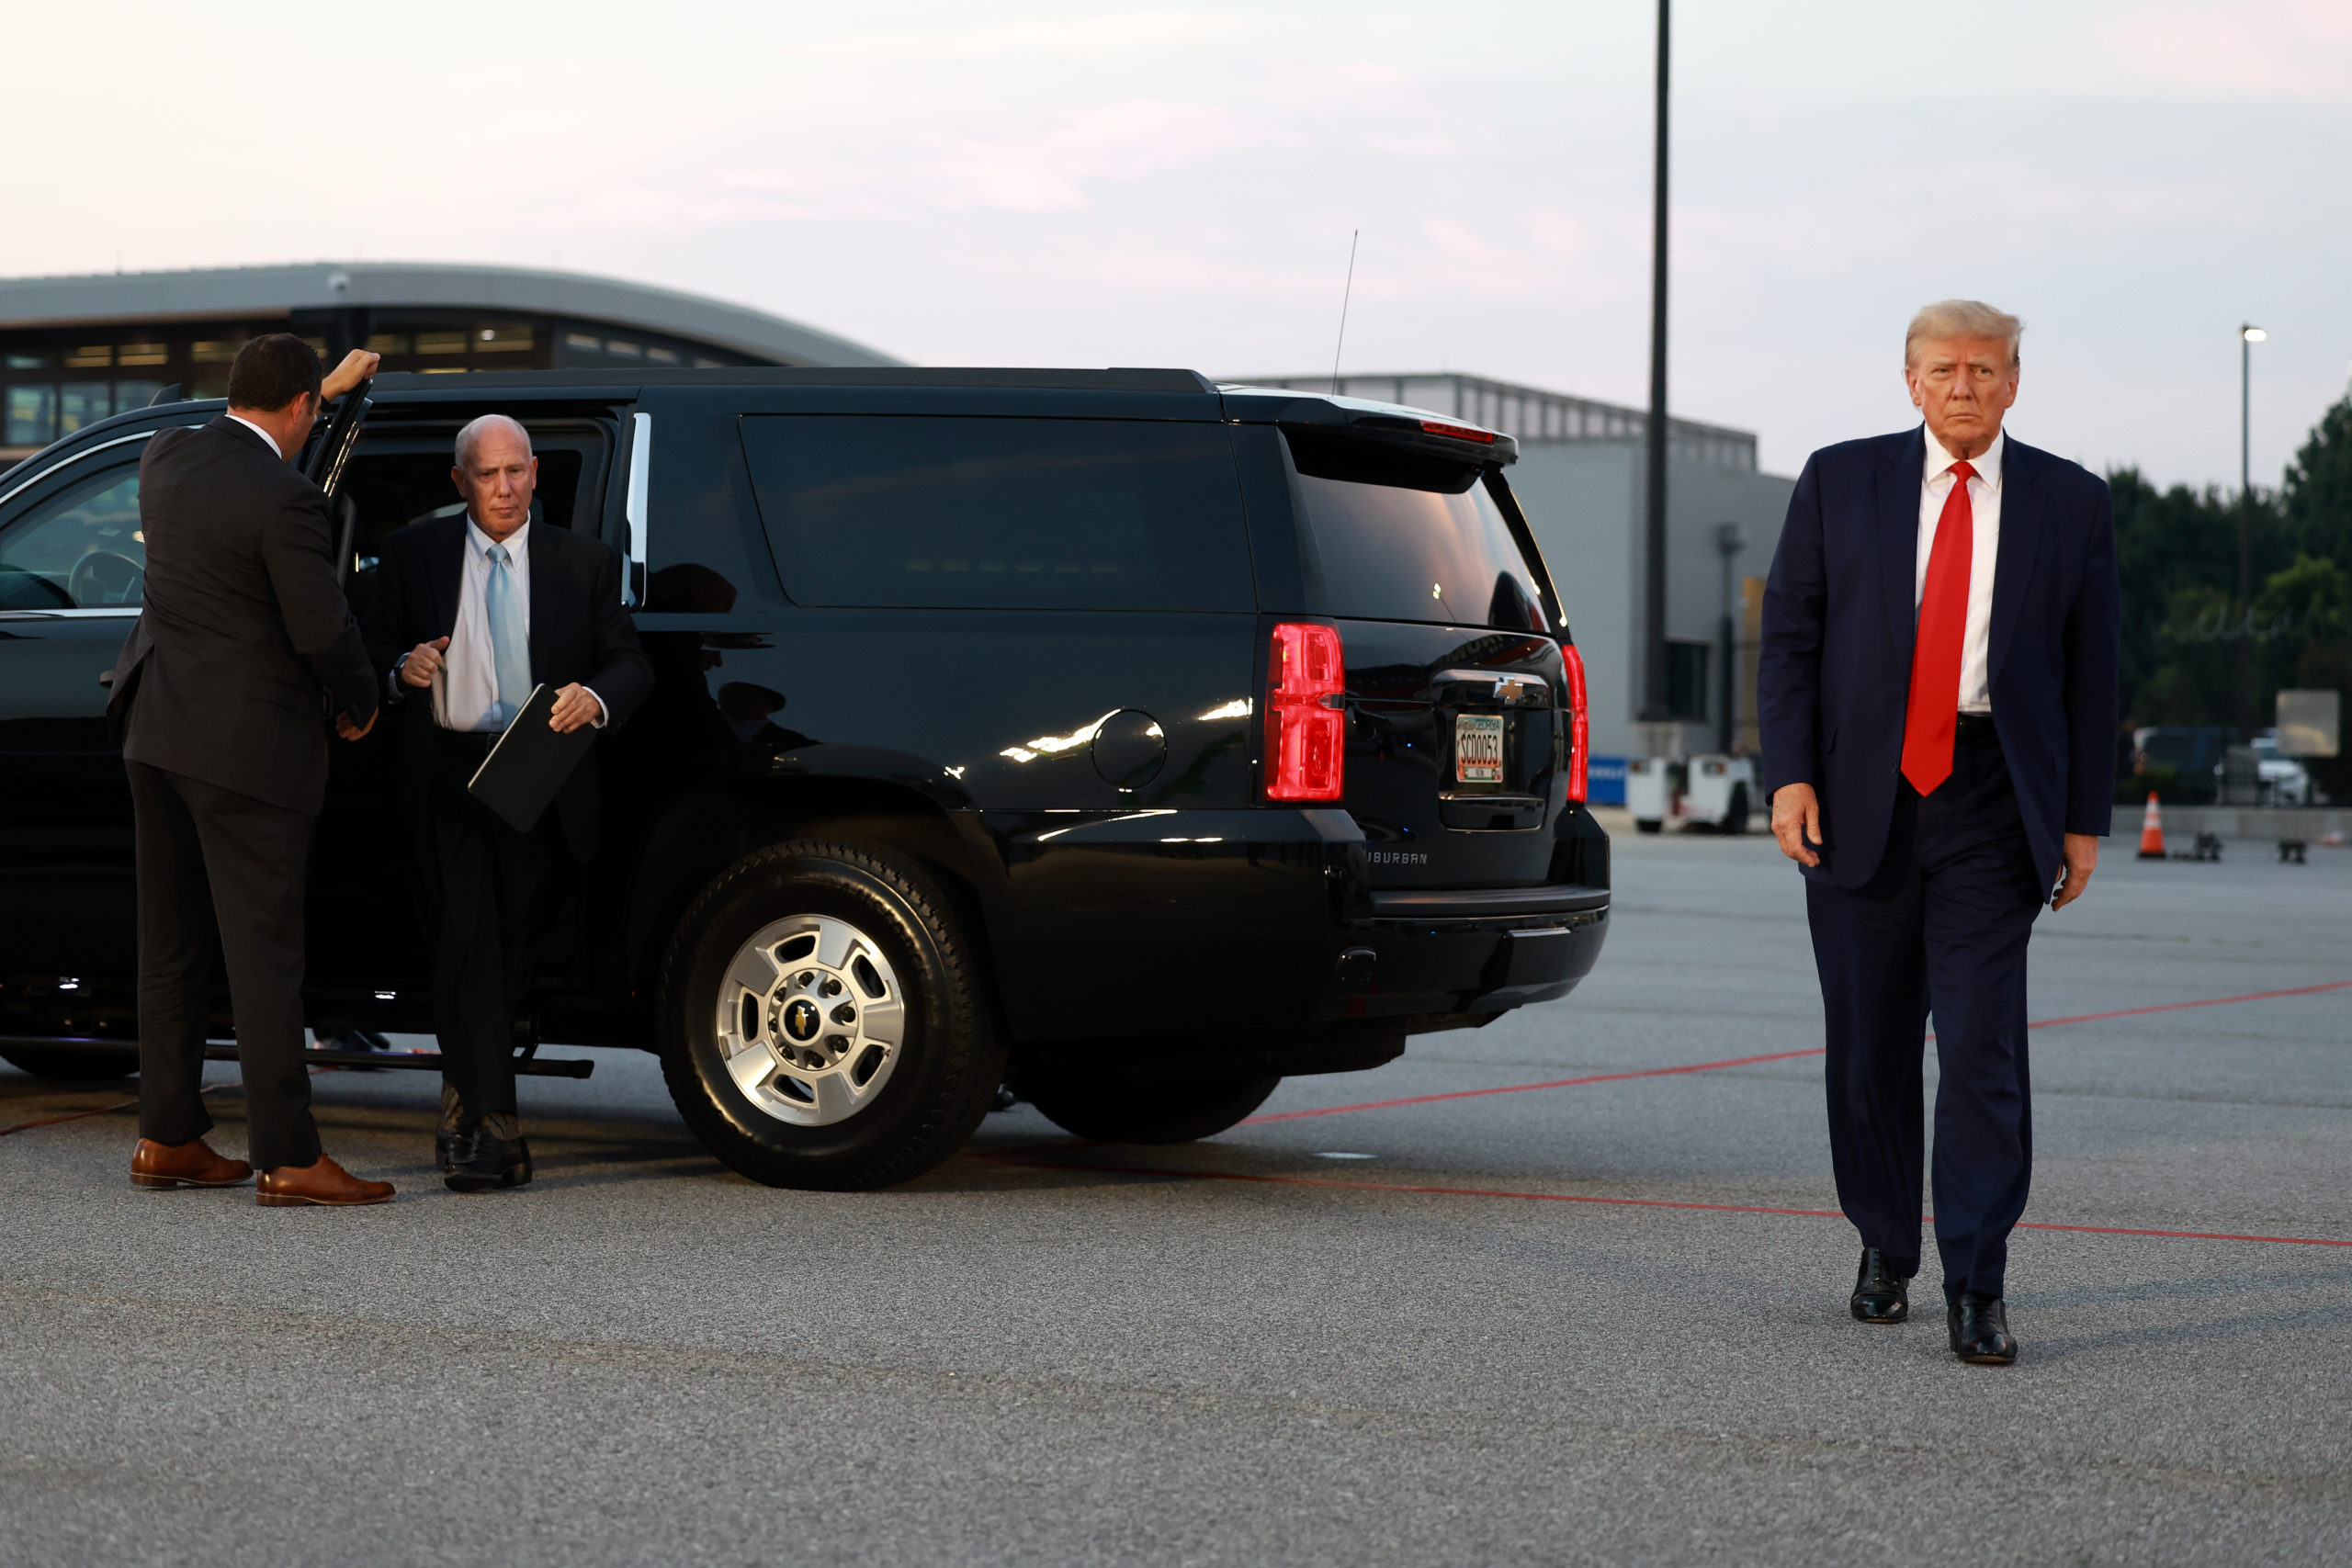 ATLANTA, GEORGIA - AUGUST 24: Former U.S. President Donald Trump and his attorney Steven Sadow (L) arrive to depart at Atlanta Hartsfield-Jackson International Airport after being booked at the Fulton County jail on August 24, 2023 in Atlanta, Georgia. Trump was booked on multiple charges related to an alleged plan to overturn the results of the 2020 presidential election in Georgia. (Photo by Joe Raedle/Getty Images)